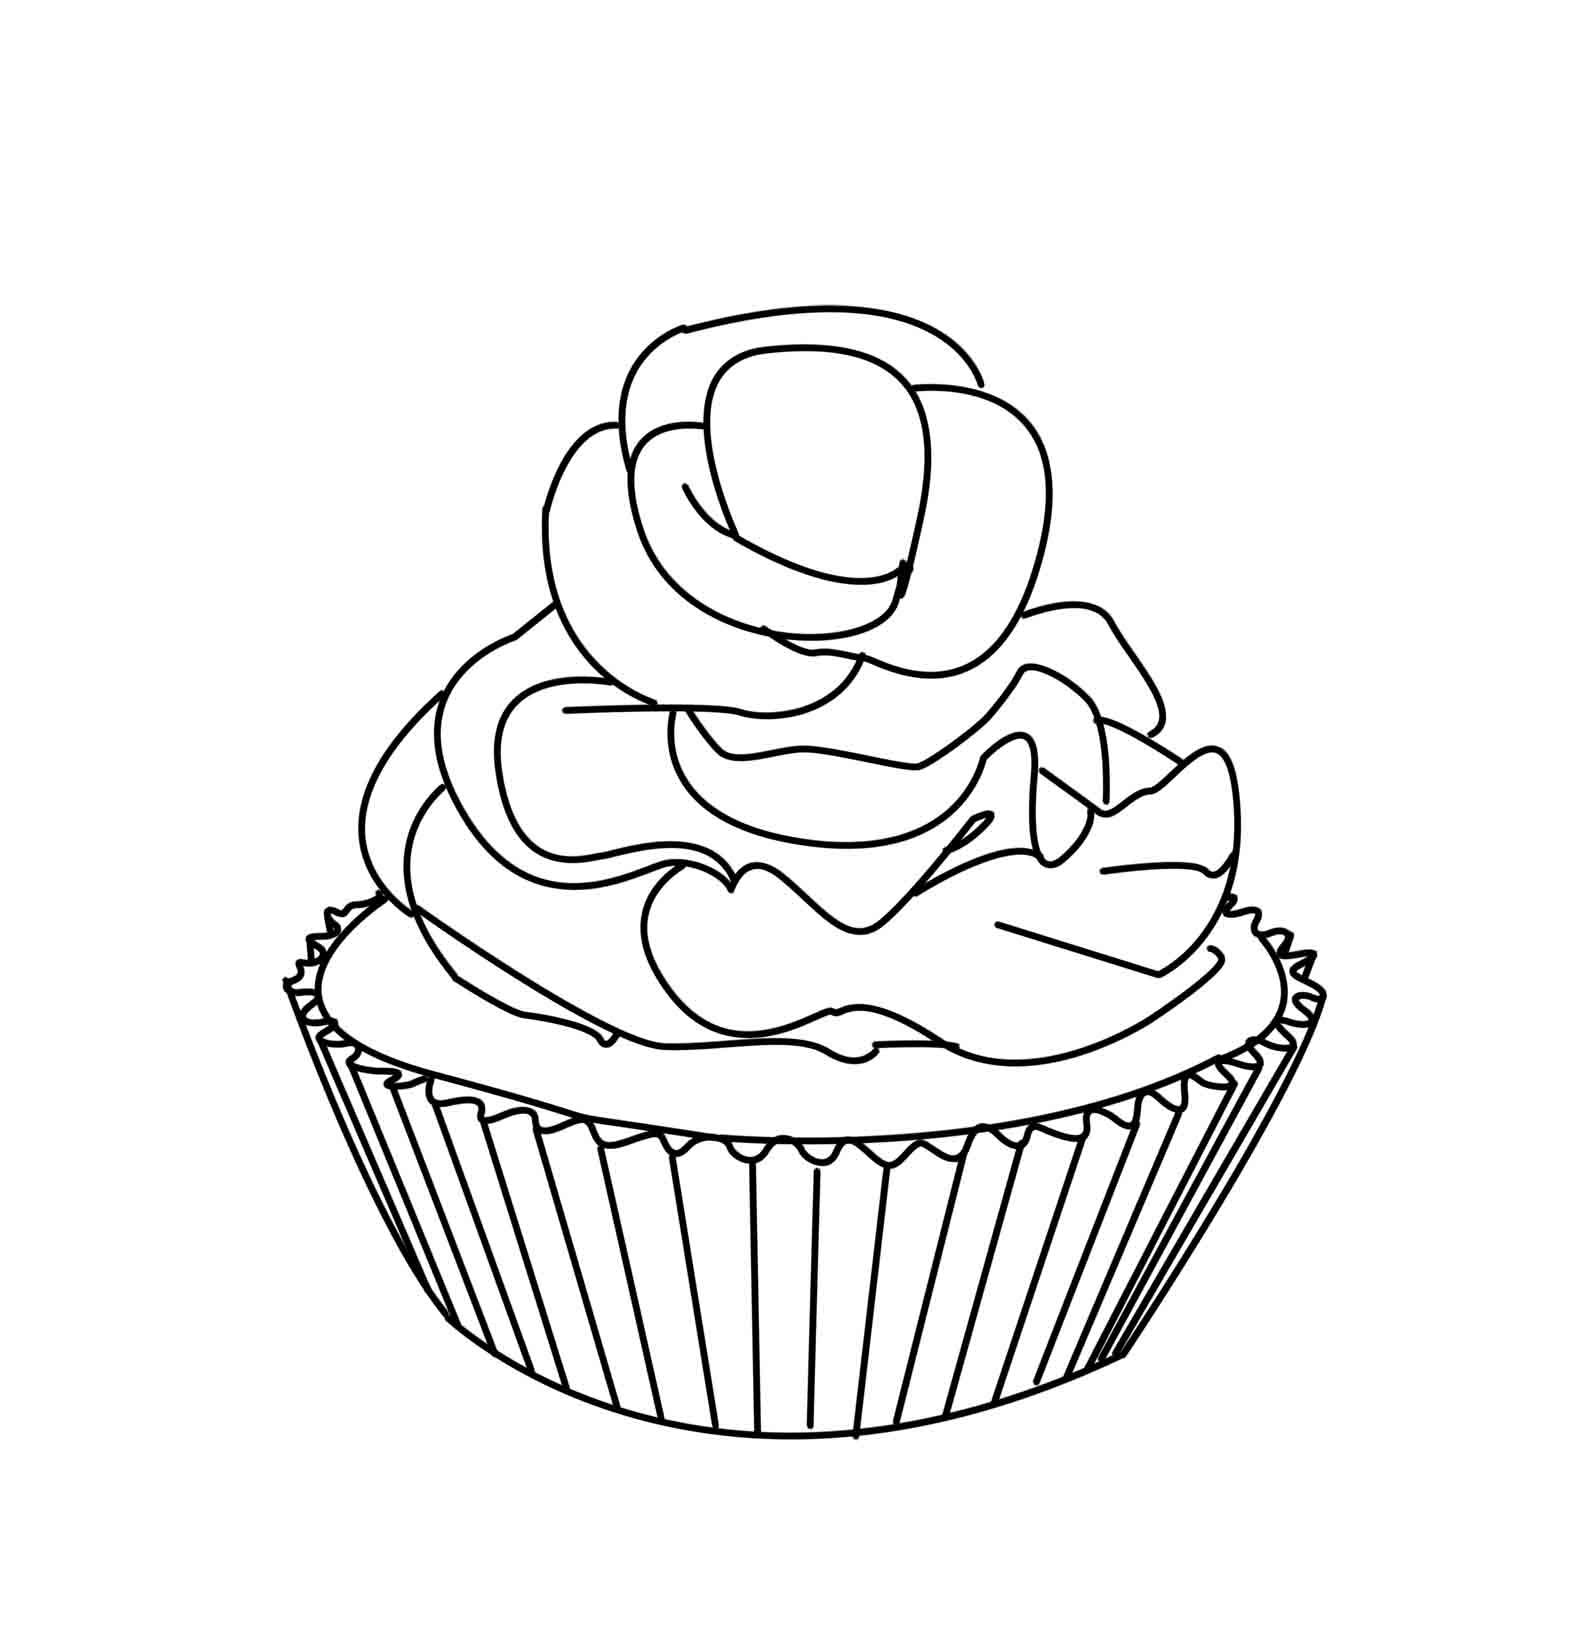 Cupcake Coloring - Coloring Pages for Kids and for Adults